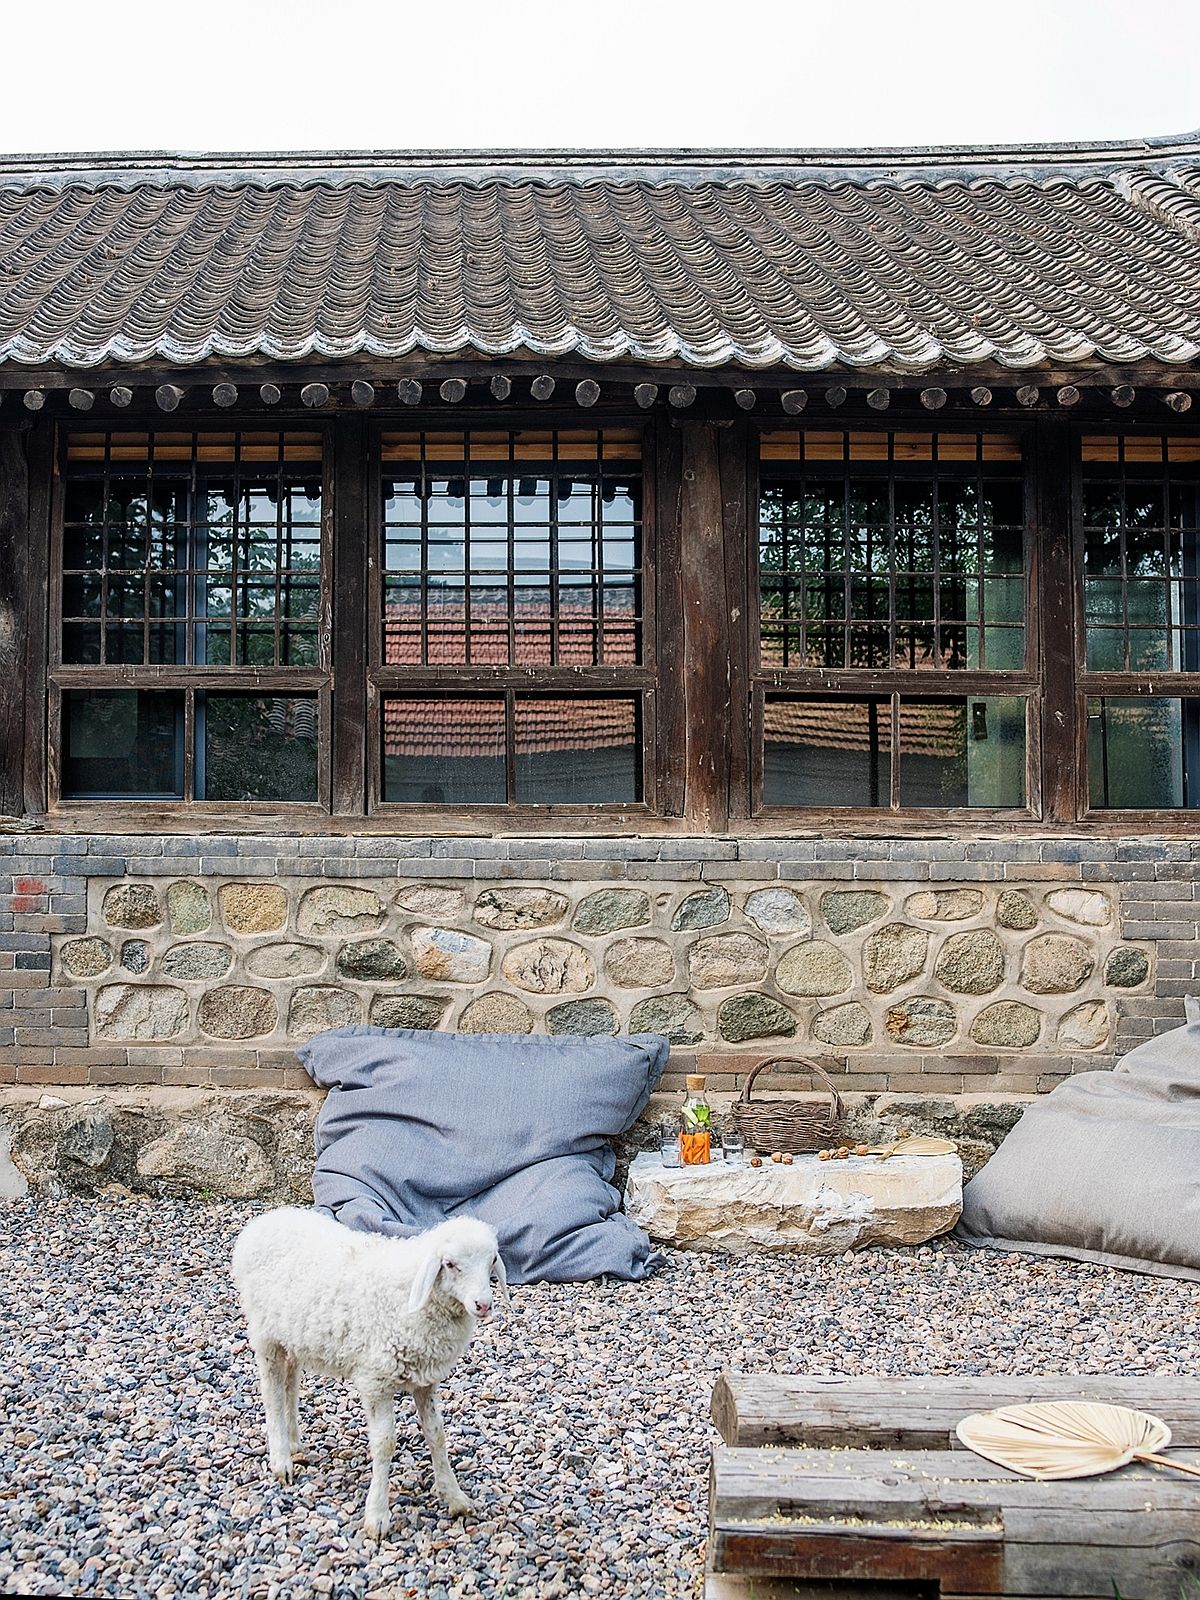 Stone-walls-terracotta-tiles-and-earthen-walls-of-the-rustic-Chinese-home